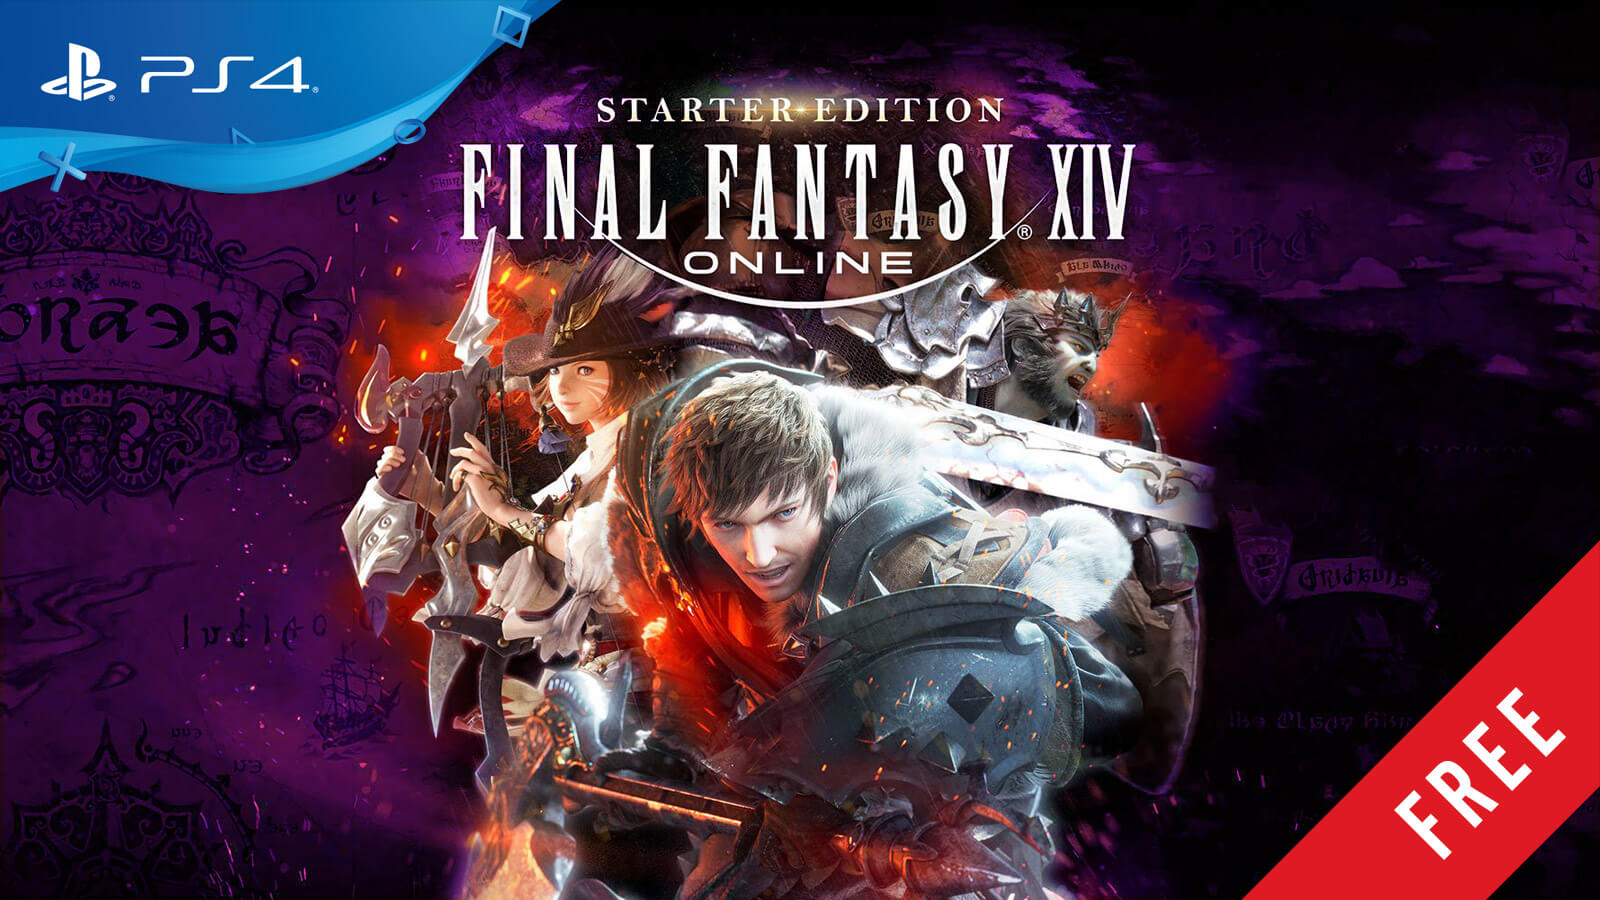 Final Fantasy Xiv Online Starter Edition Free On Ps4 Now